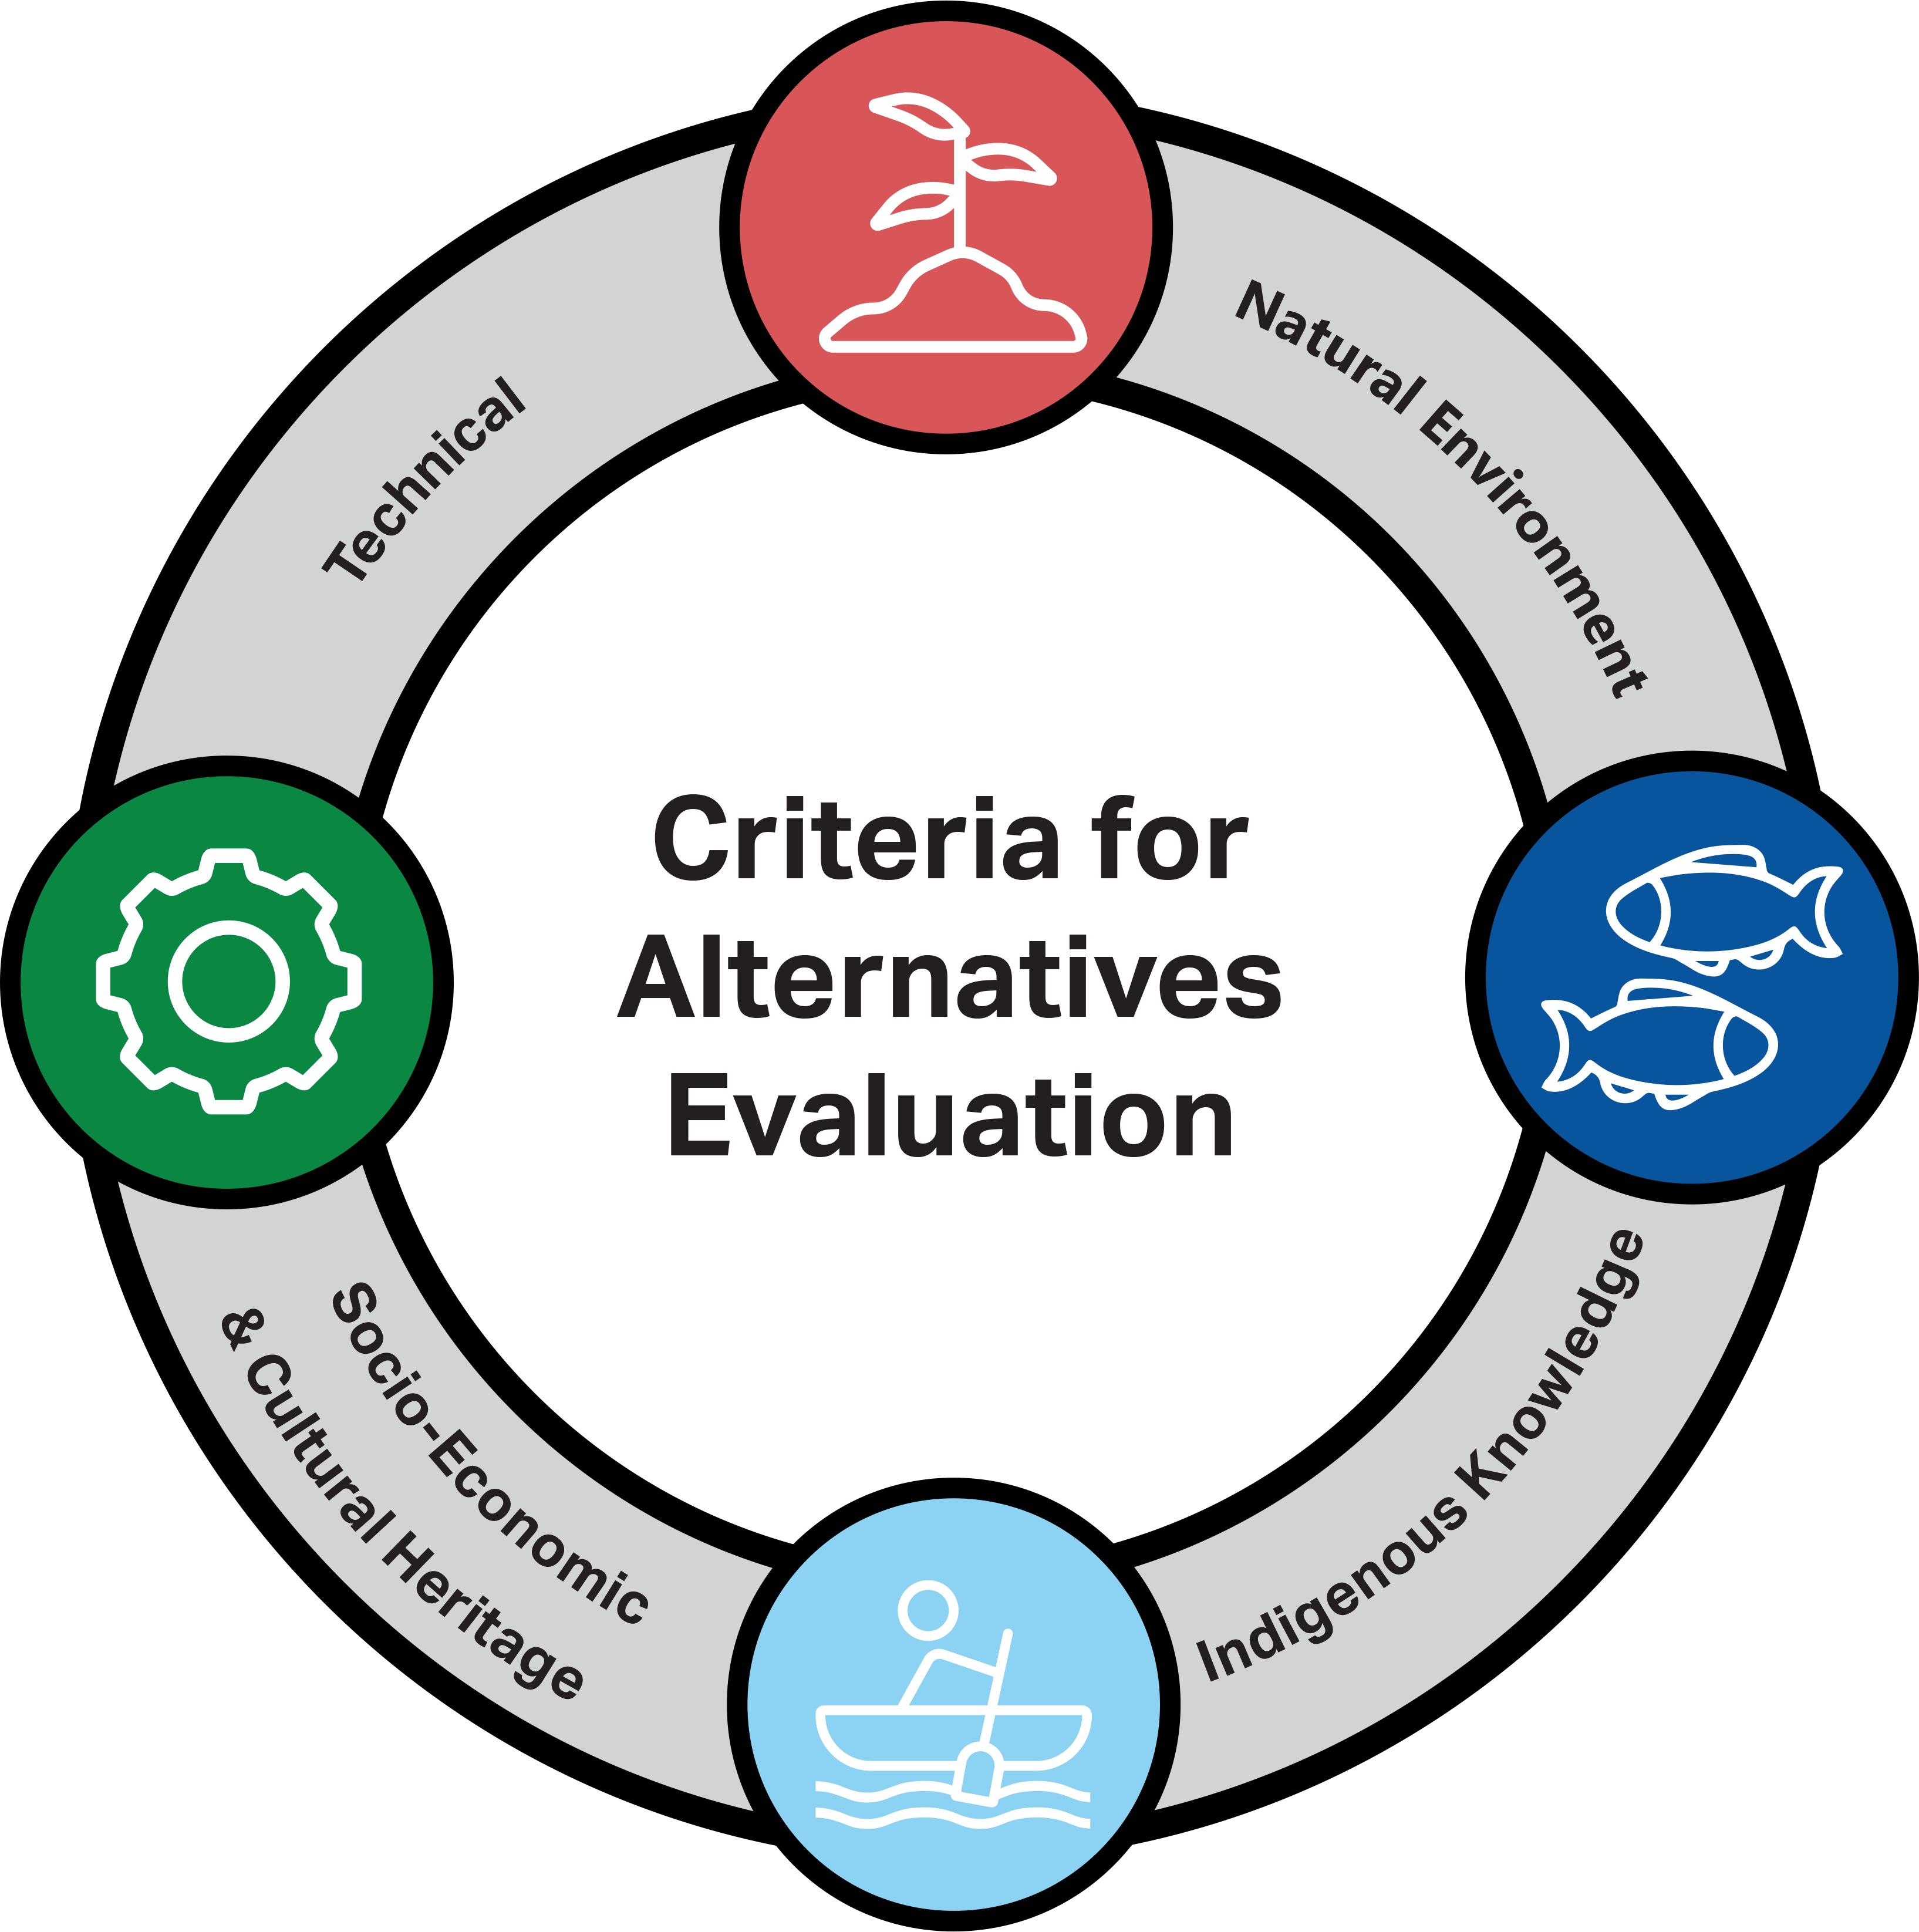 A graphic showing the criteria for evaluating the alternative routes